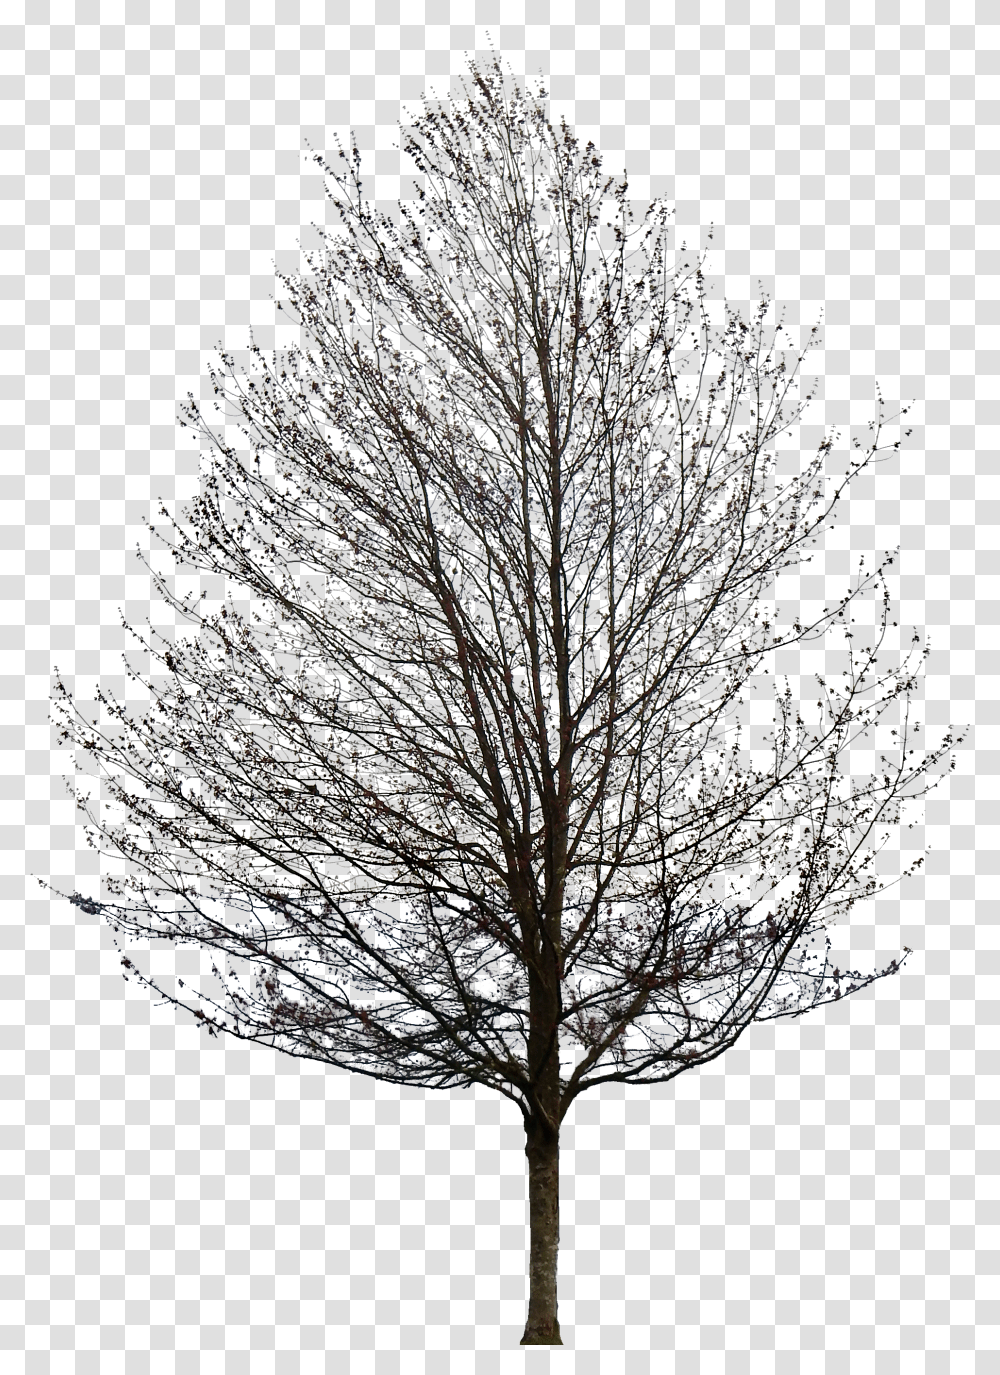 Tree Without Leaves Download Oak Tree Pencil Drawing, Plant, Fir, Outdoors, Nature Transparent Png